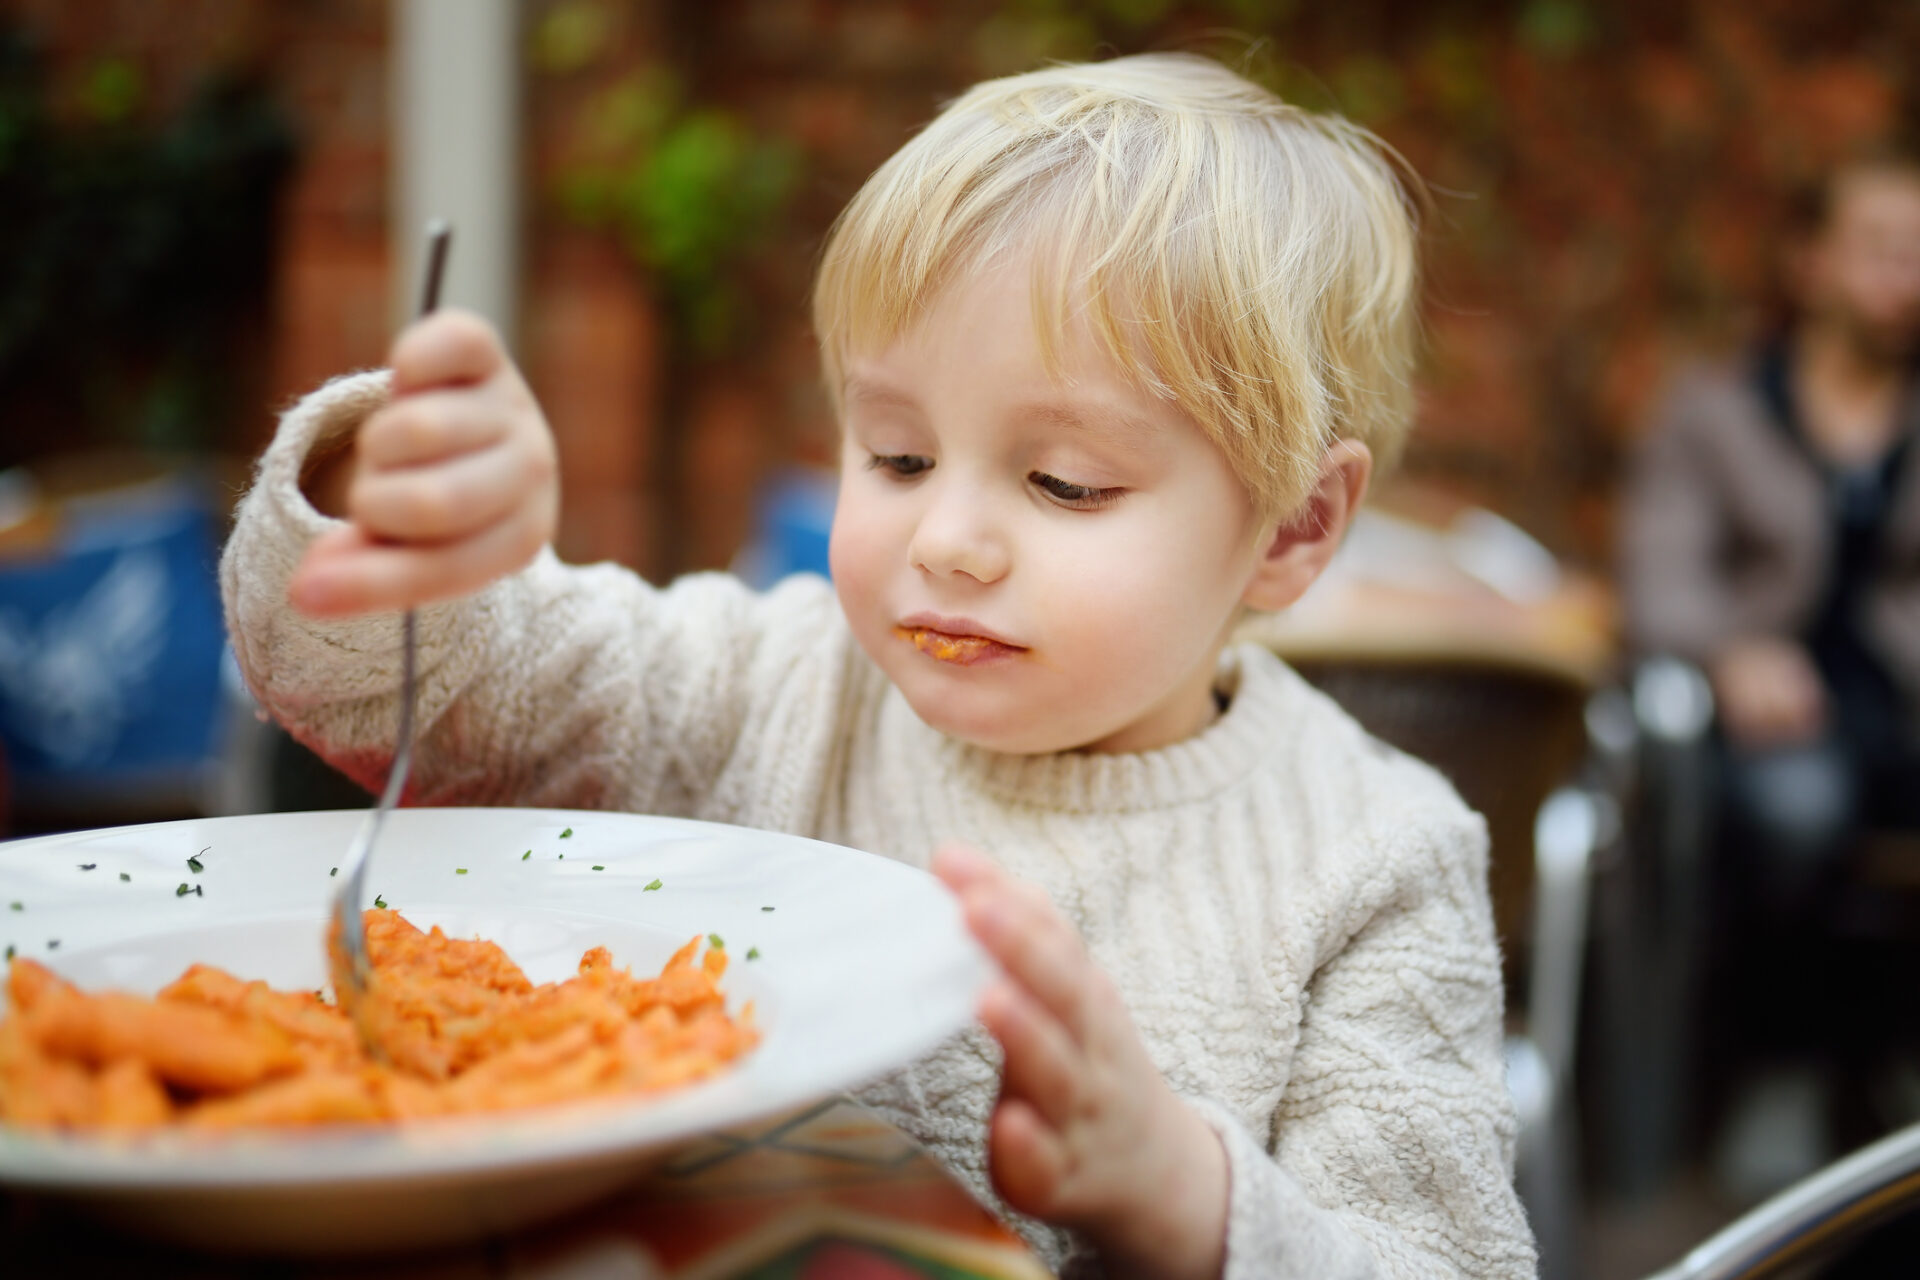 Should Restaurants Have the Right to Ban Kids? Child eating a plate of pasta